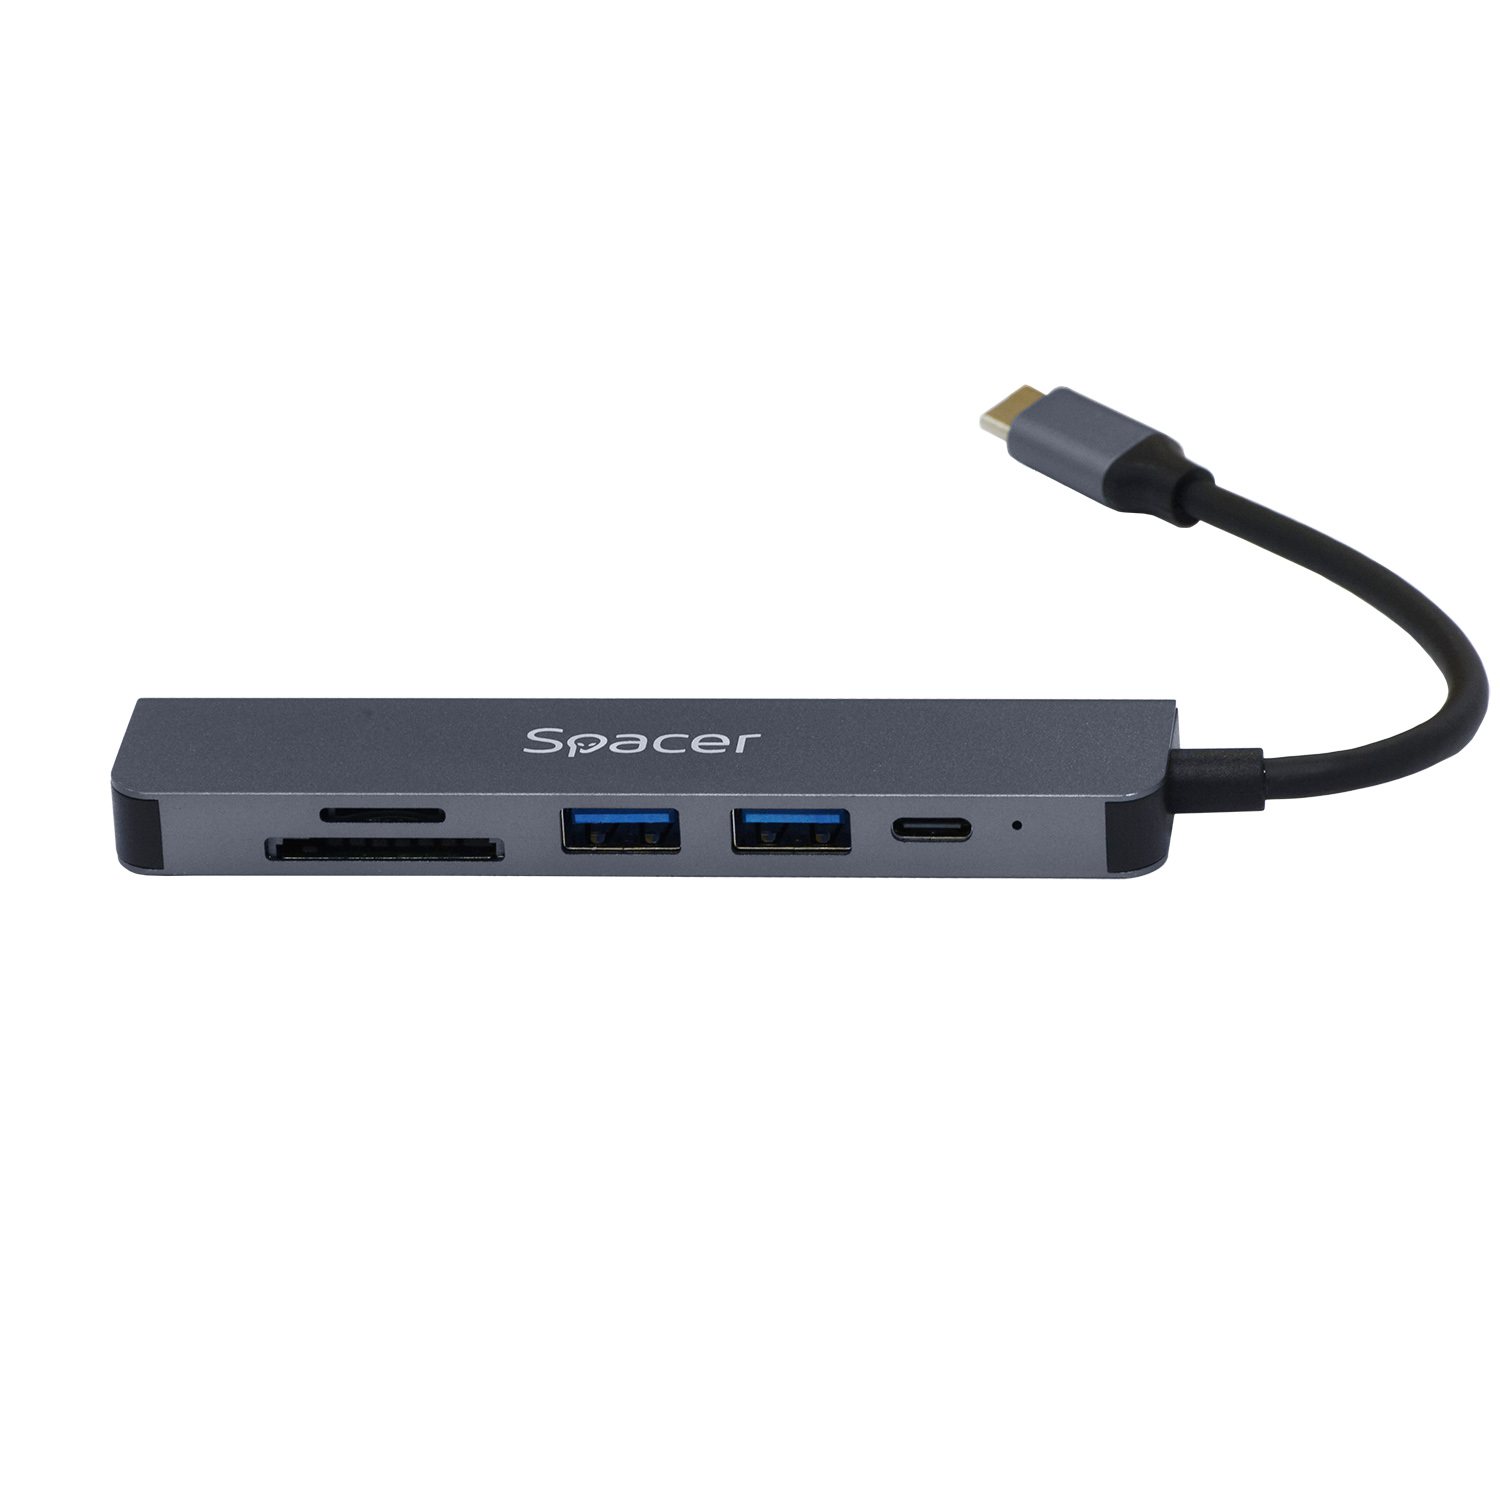 DOCKING Station Spacer universal 6 in 1, conectare Type-C, USB 3.0 x 2 |PD 3.0 x 1 (87W), porturi video HDMI x 1, 4K (30Hz),SD card x 1, TF (MicroSD card) x 1, gri, Aluminiu, "SPDS-TypeC-HUPS-6in1" (include TV 0.18 lei) thumb